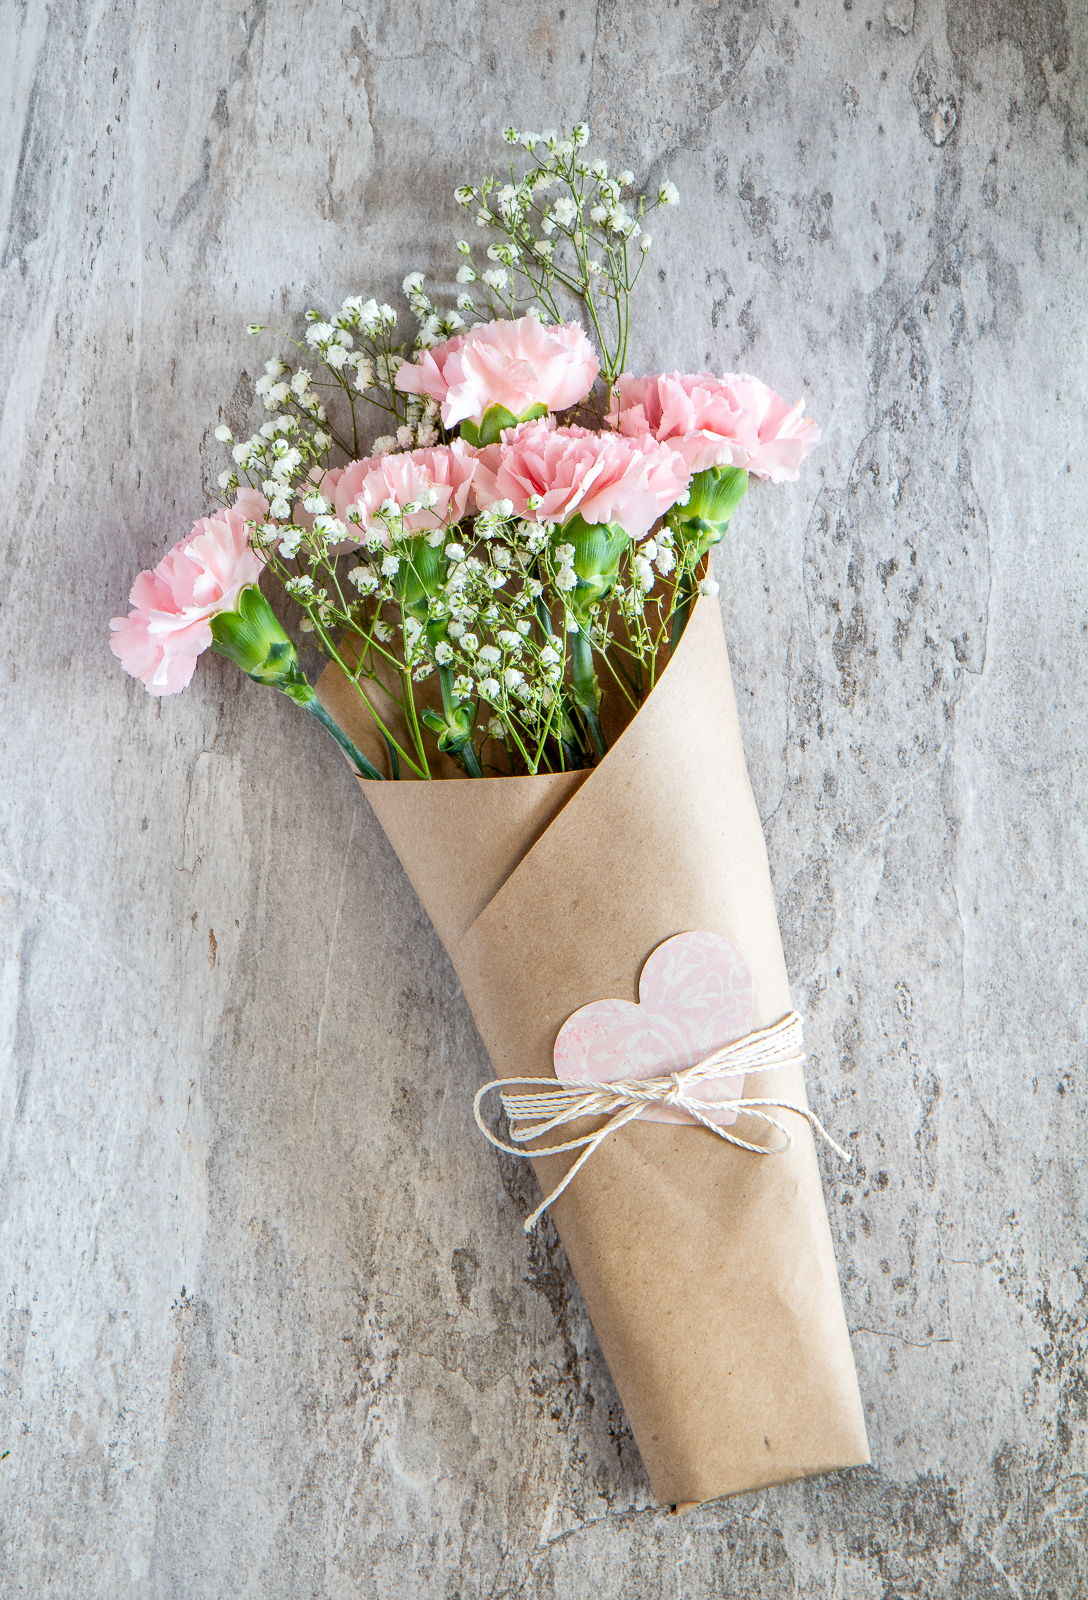 How Should A Flower Bouquet Be Wrapped?